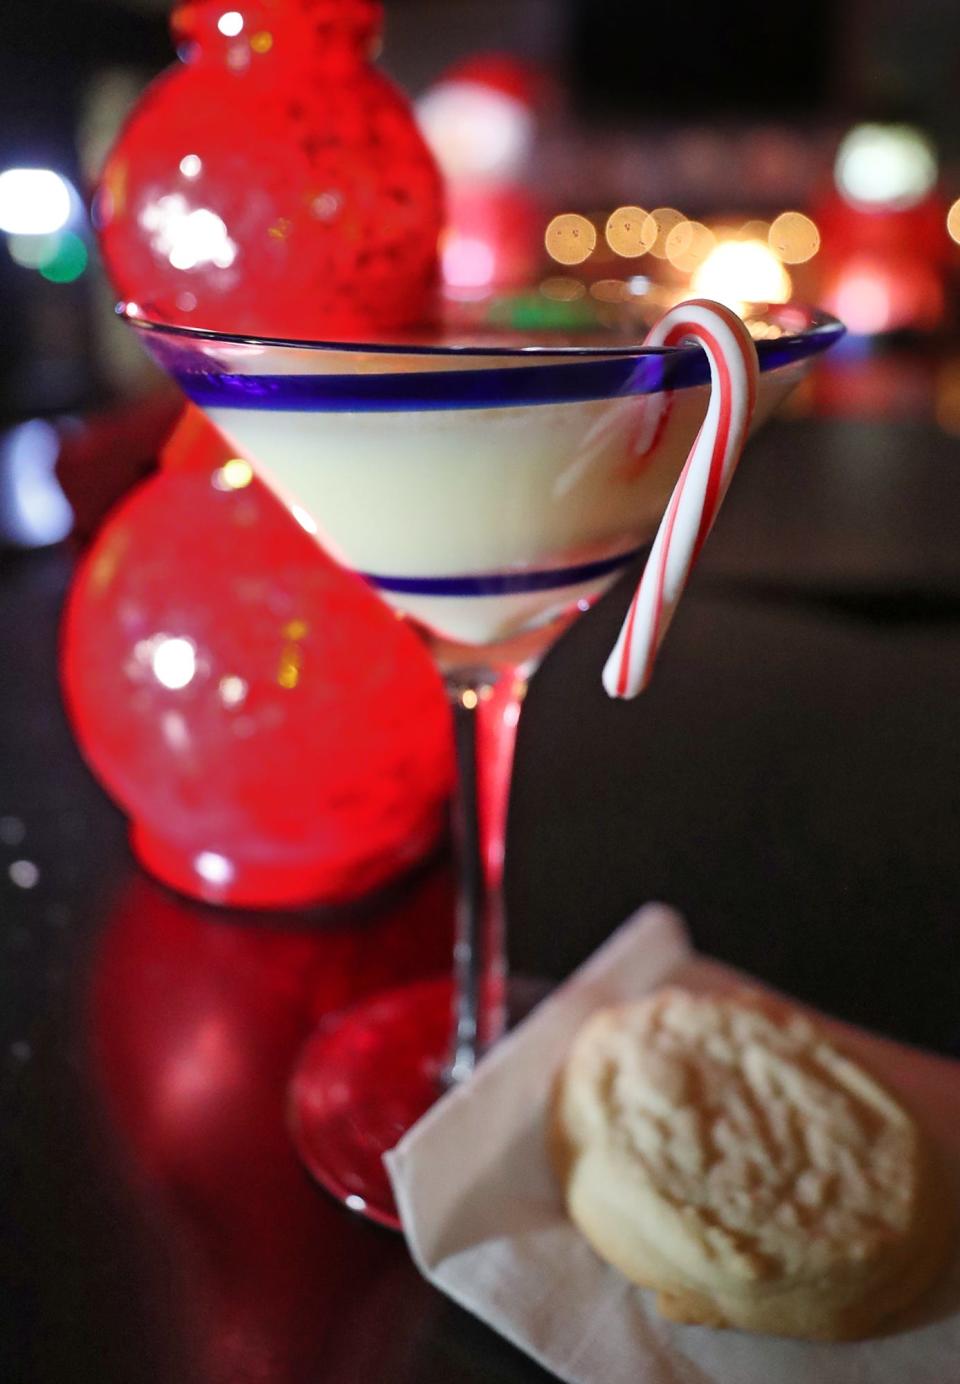 The holiday drink You Filthy Animal!, which has eggnog and a double shot of rum, is served with a Christmas cookie at The President's Lounge. The Akron bar has transformed into the Reindeer Room for the holiday season.
(Photo: Mike Cardew, Akron Beacon Journal)